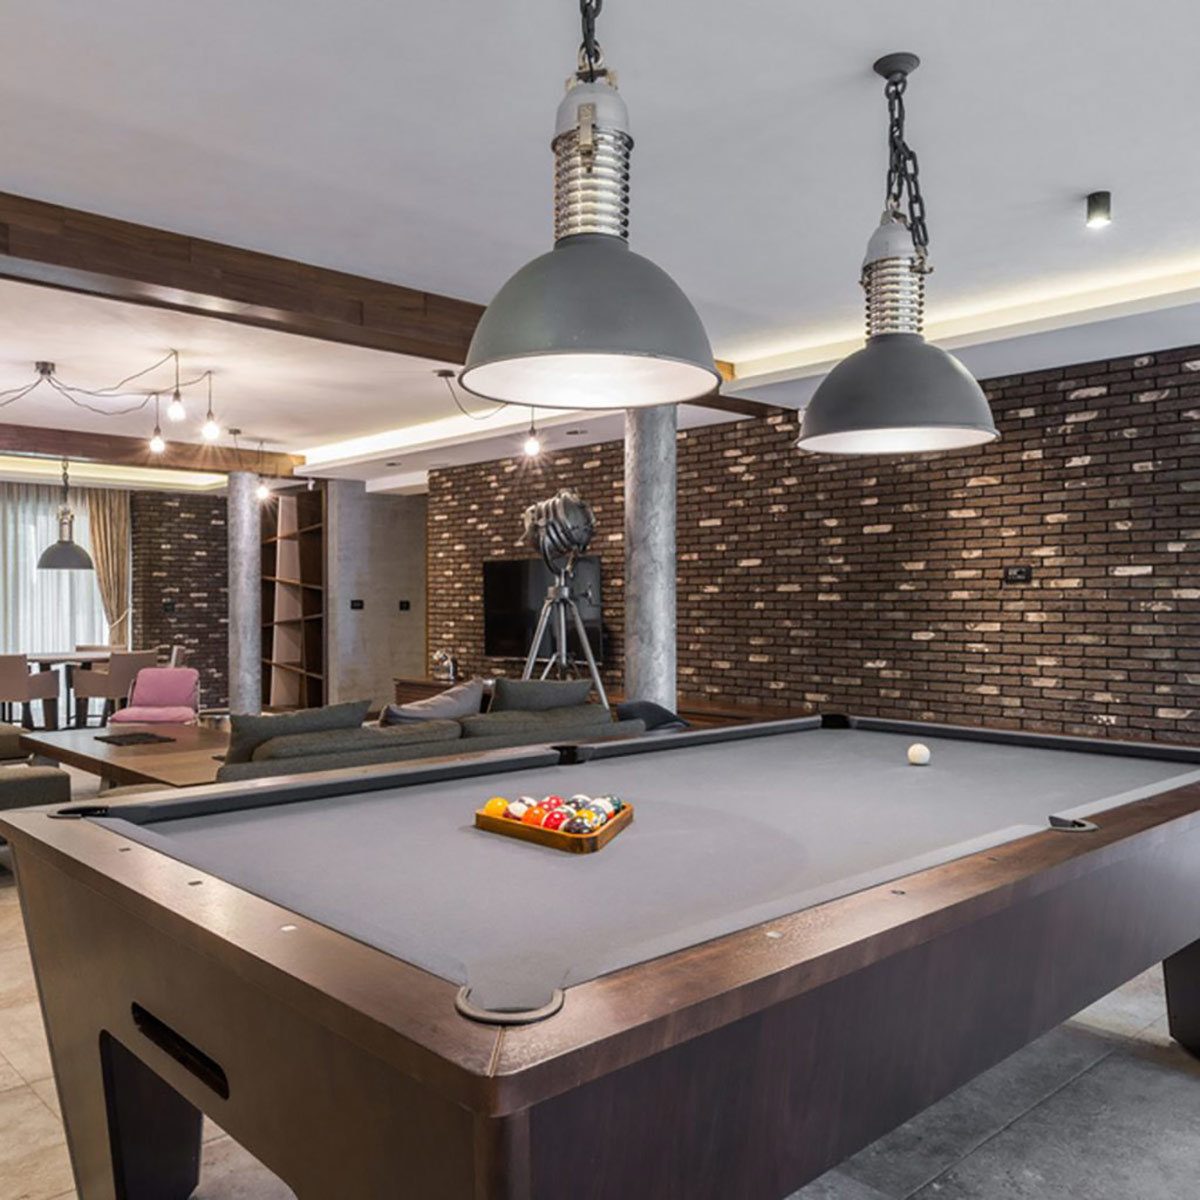 dfh17aug016_shutterstock_360392798-game room pool table with stone brick veneers